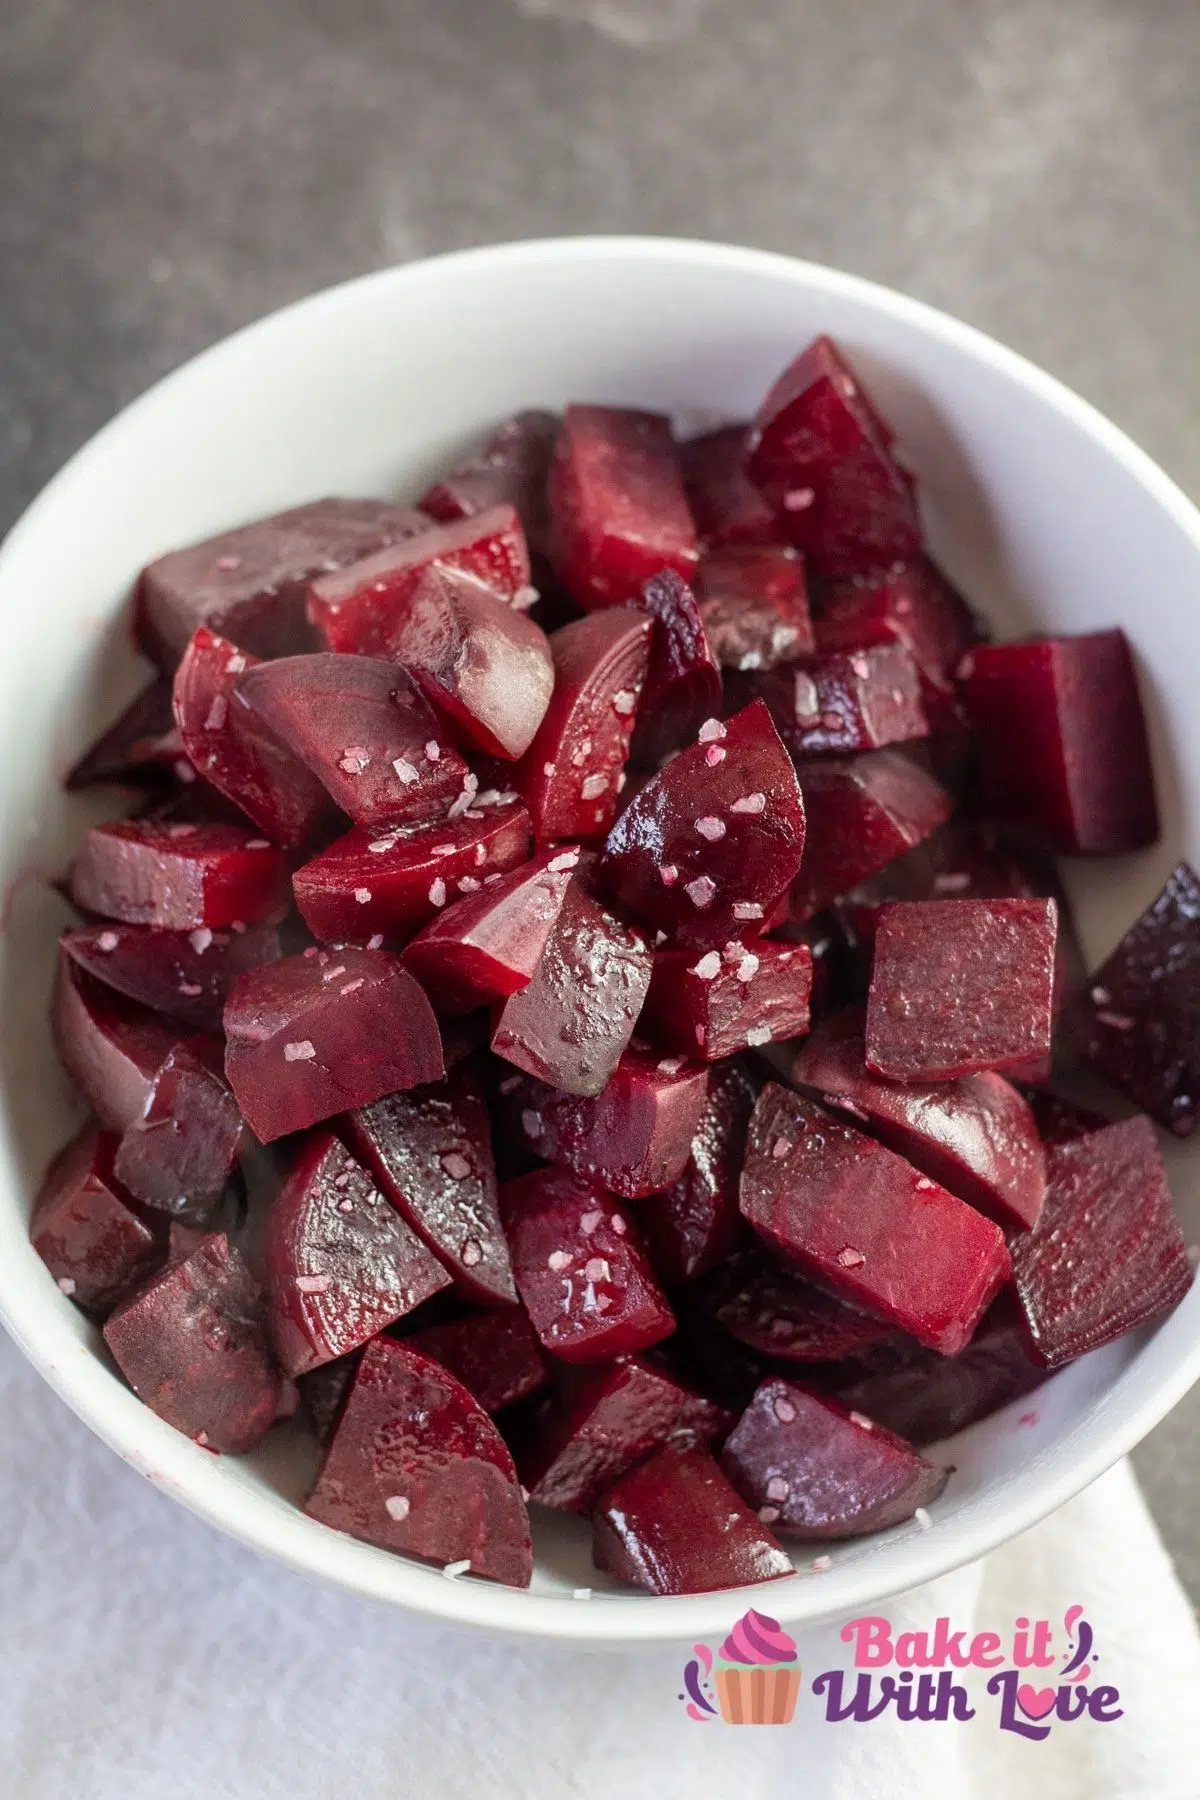 Tall overhead image of the roasted beets in white bowl on grey background.